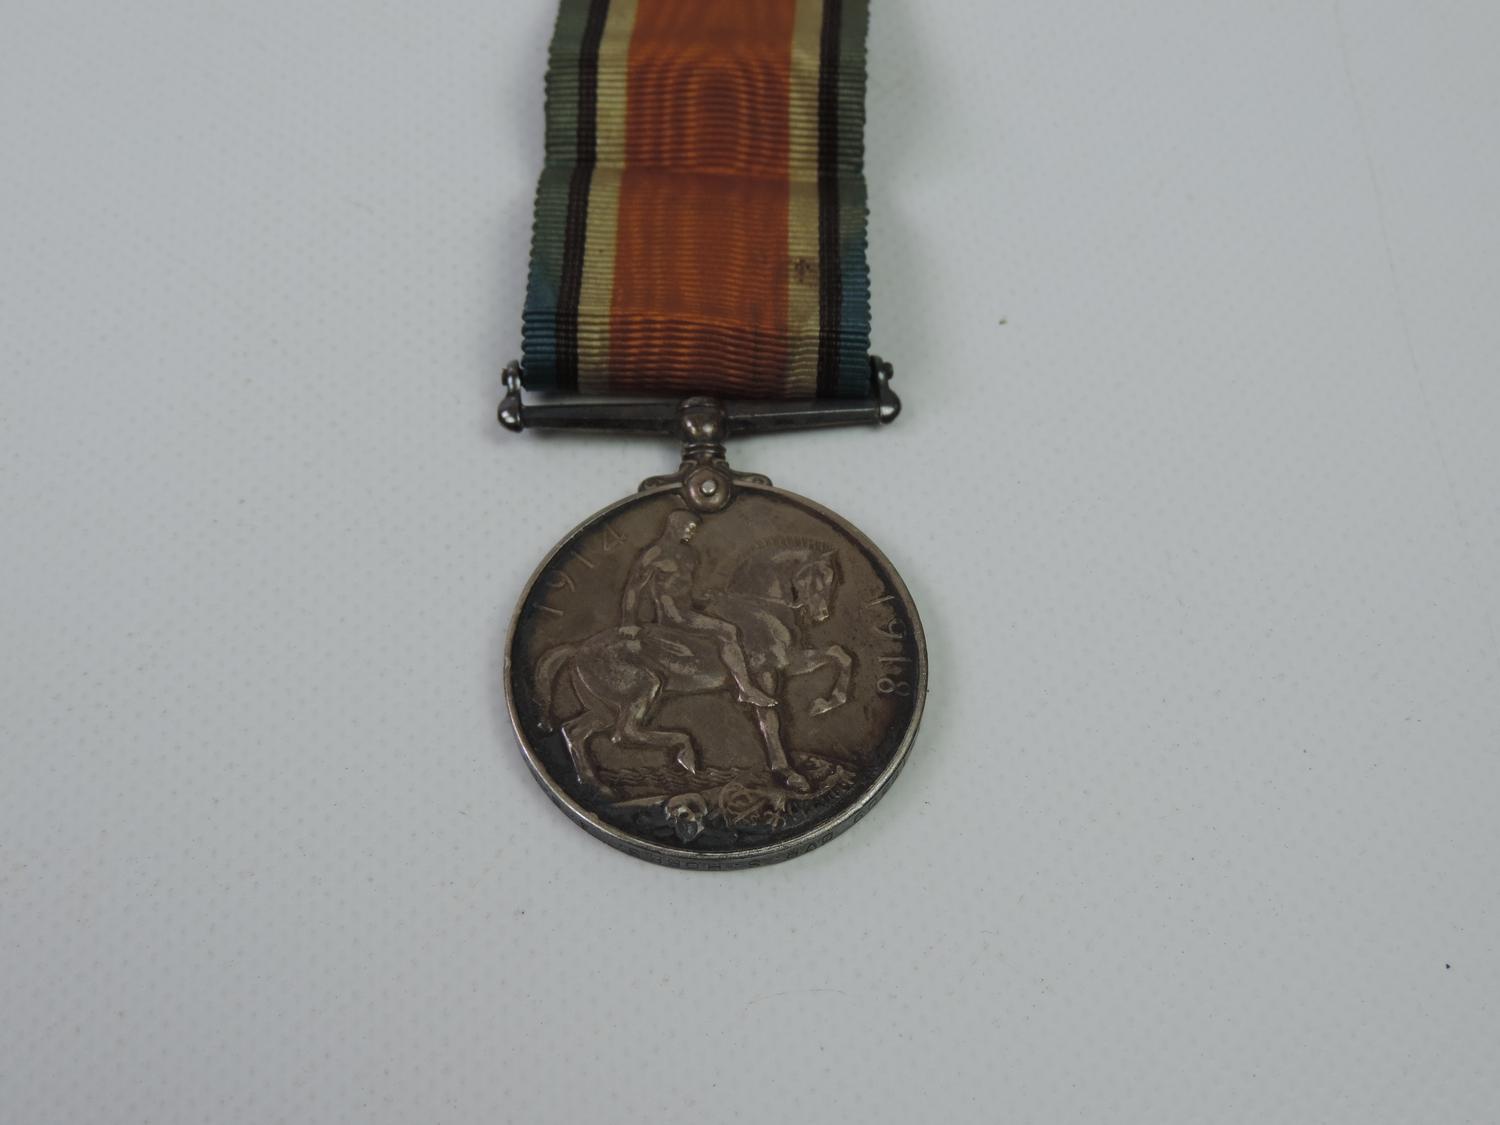 WWI Medals Awarded to Sydney Hobbs (Driver in Army Service Corps) - Image 2 of 6